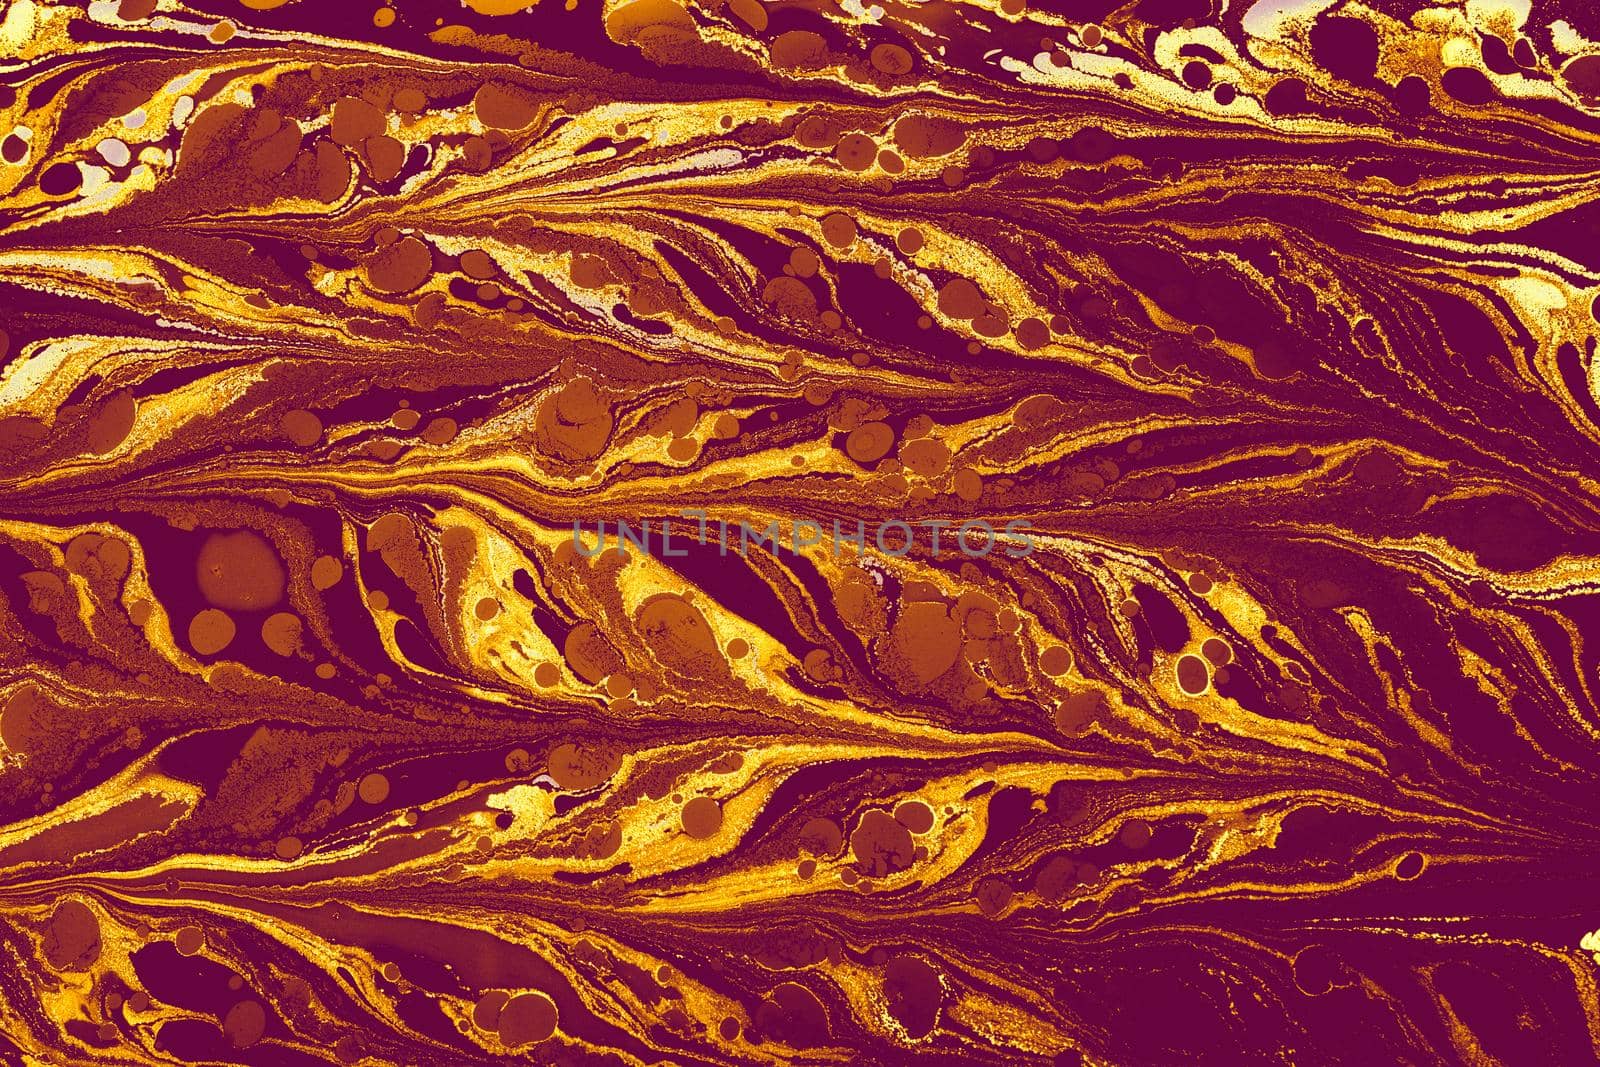 Abstract creative marble pattern texture. Traditional art of Ebru marbling by berkay